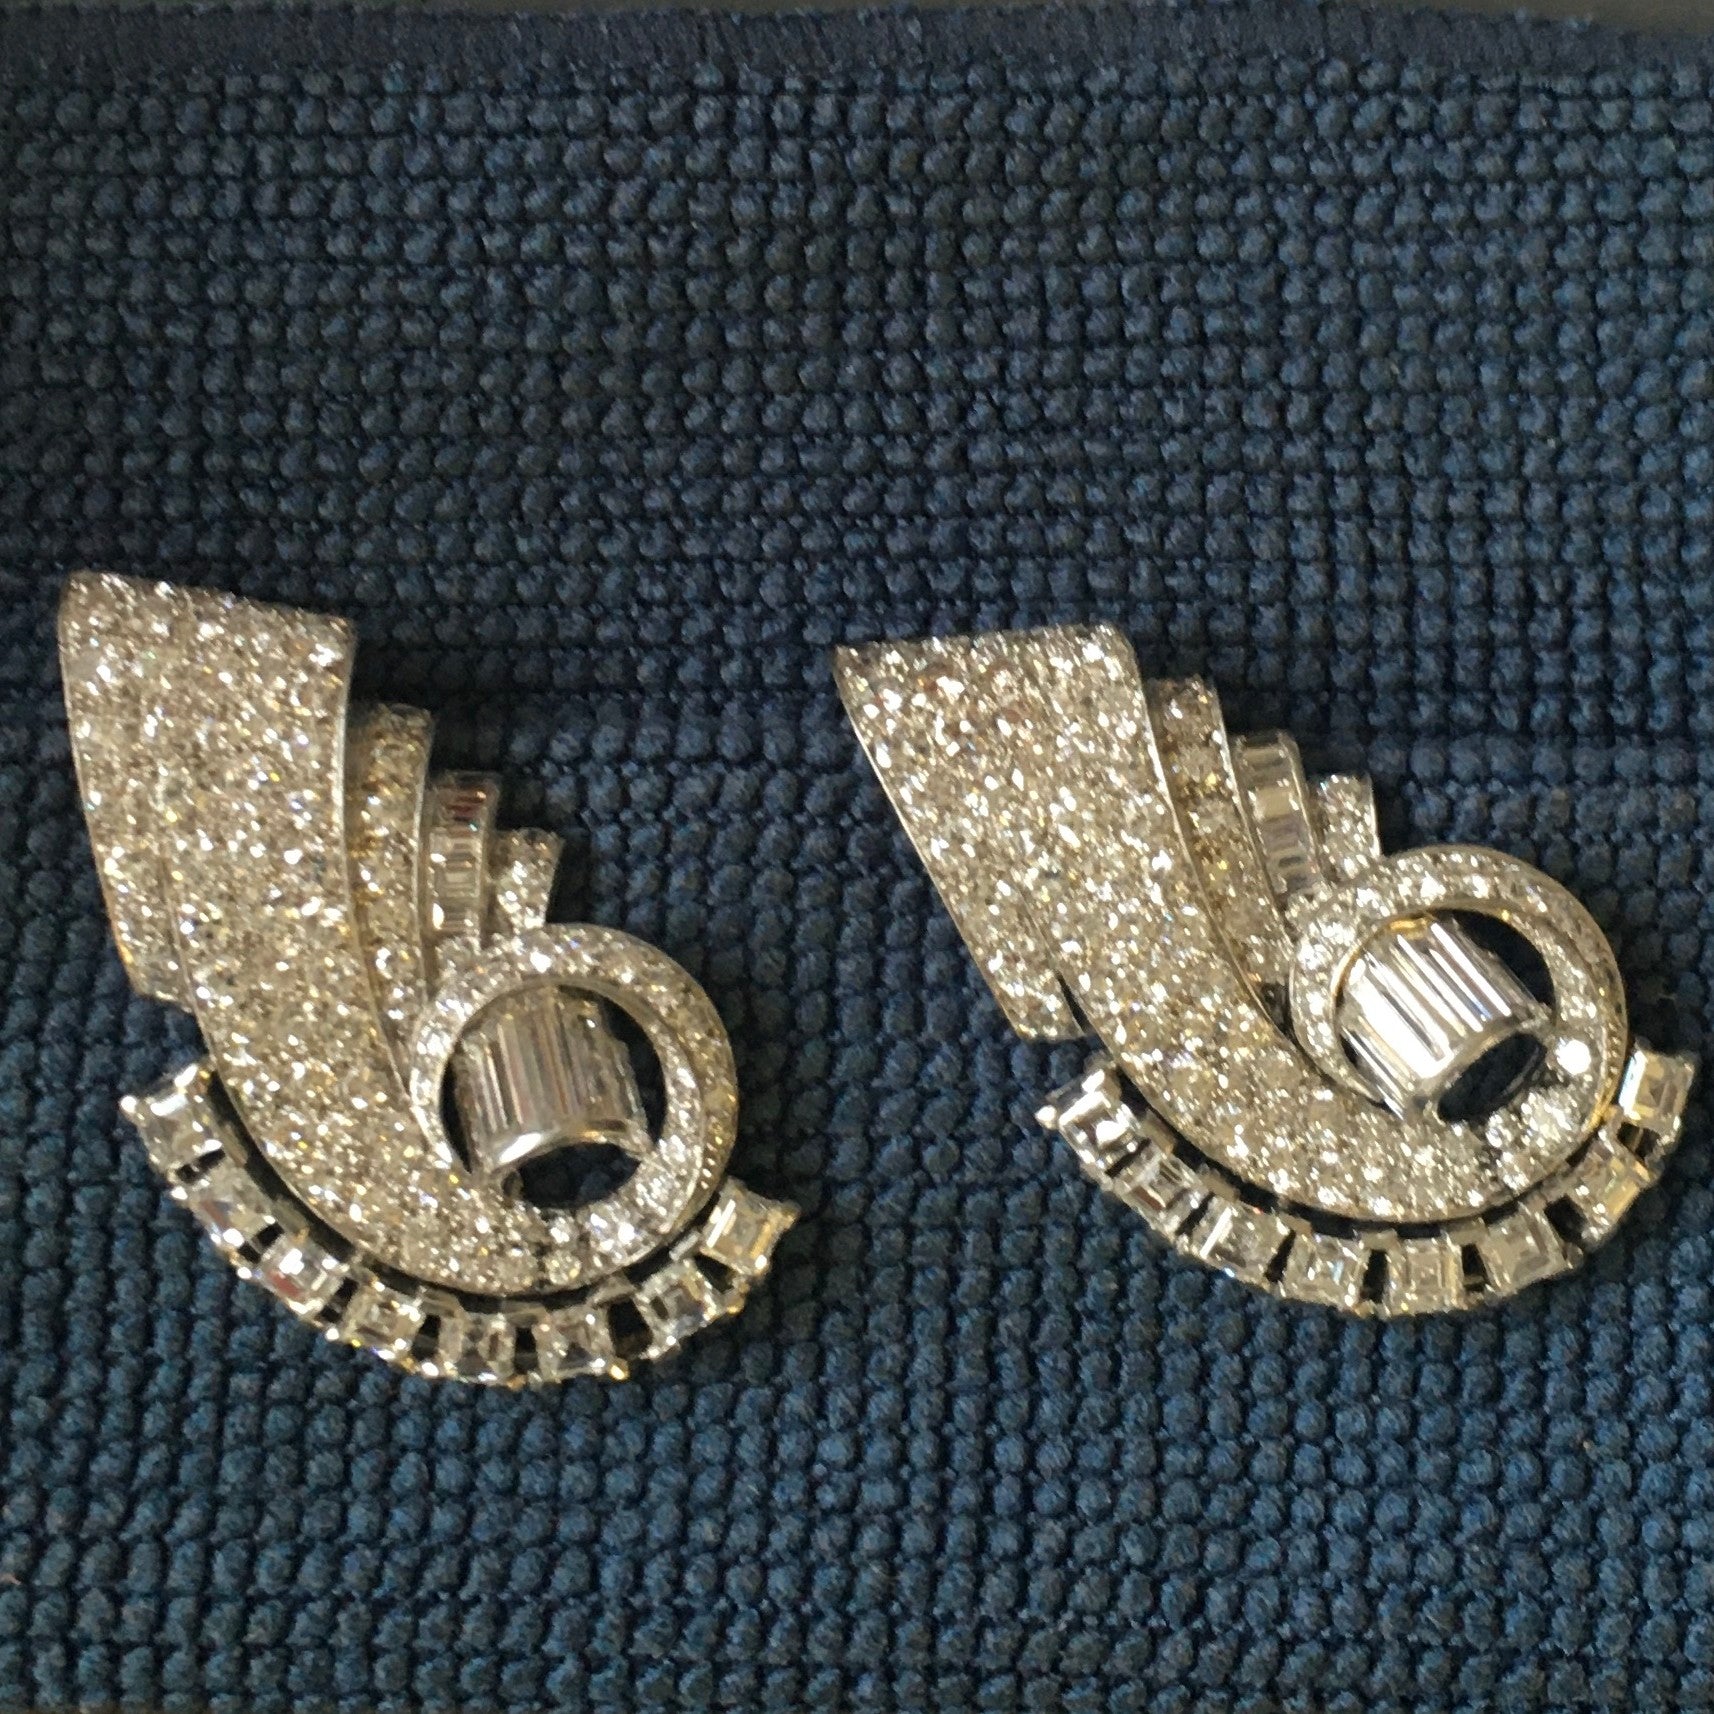 French 1940s Platinum Diamond Dress Clips front